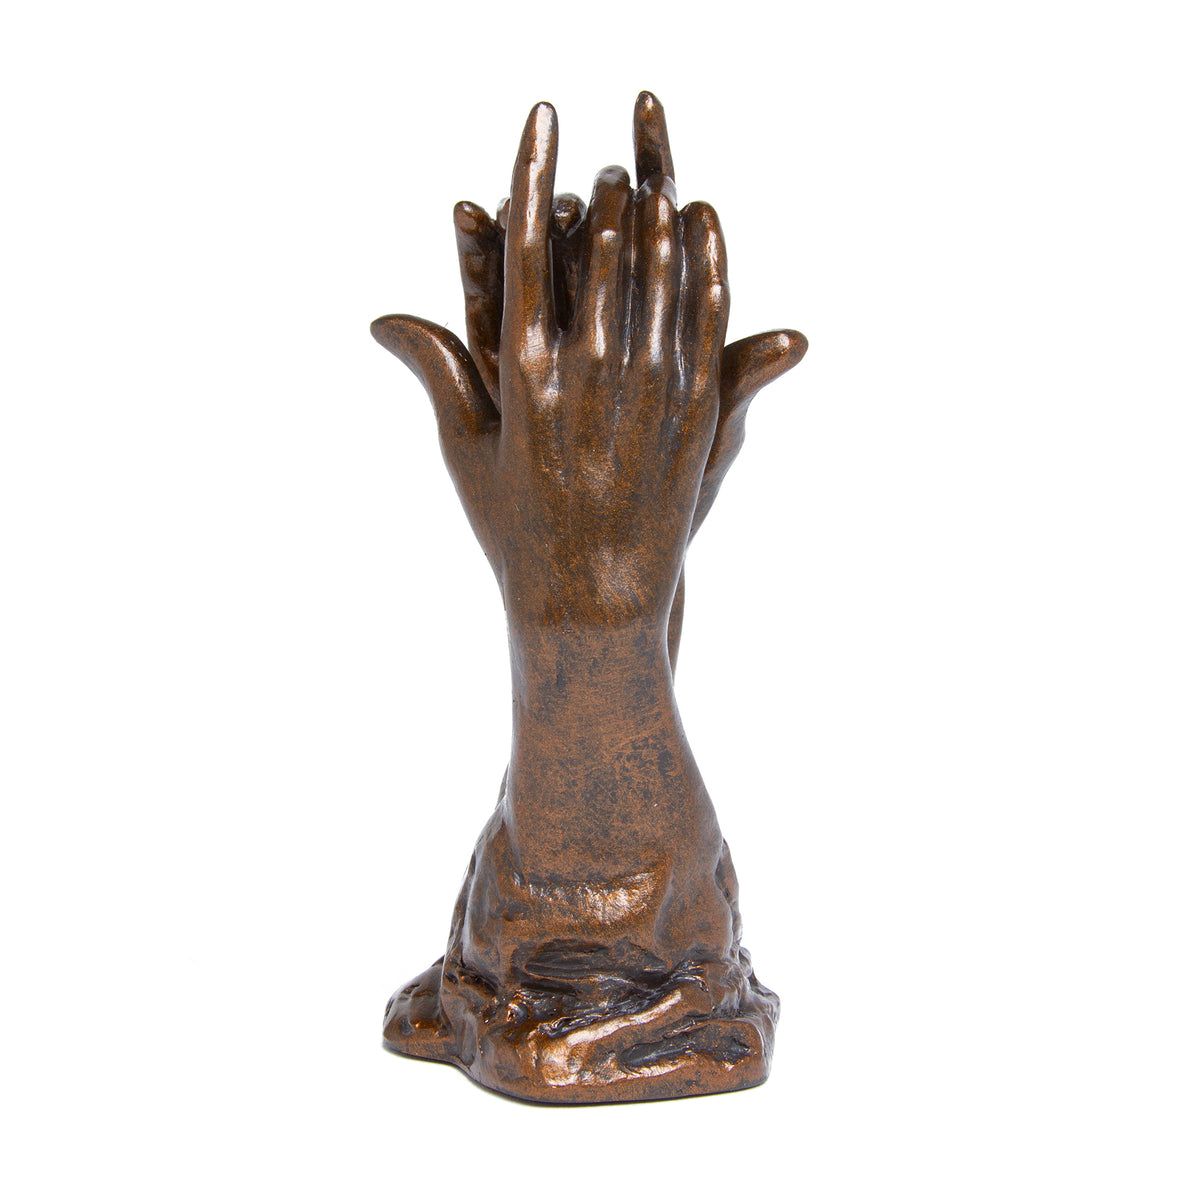 Miniature Hands by Auguste Rodin - Getty Museum Store